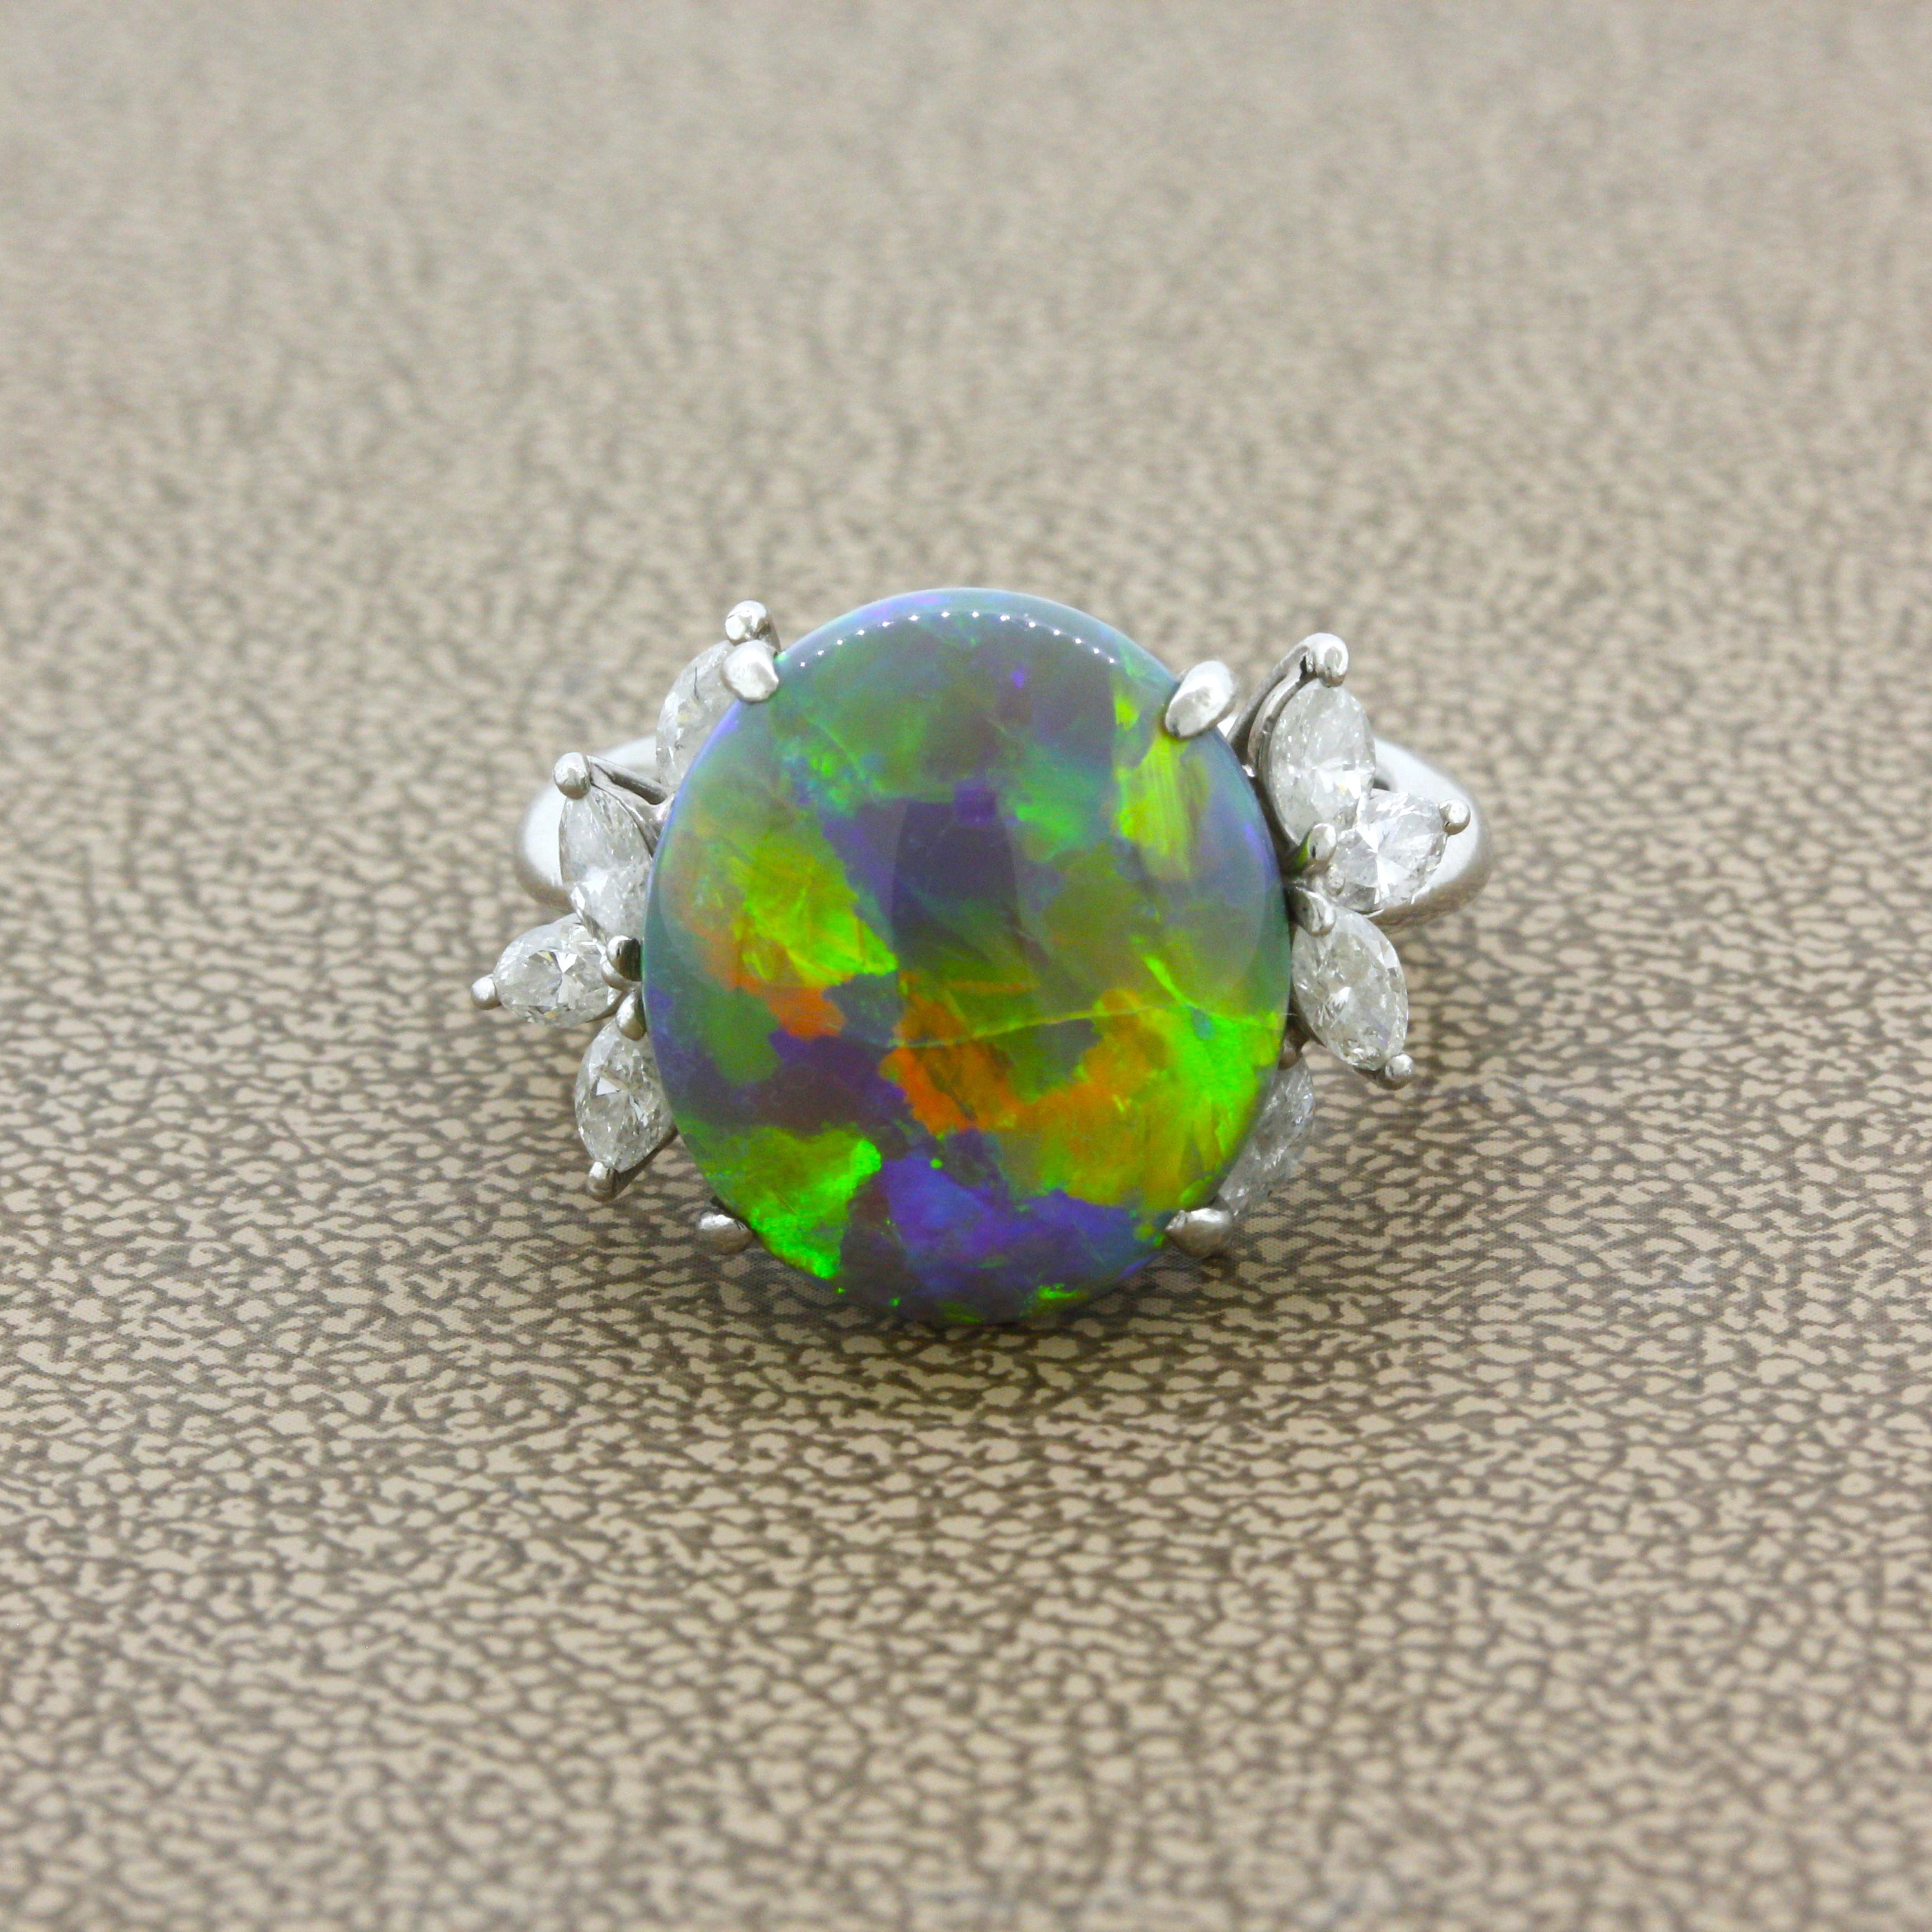 A very fine gem, this black crystal opal from Australia weighs an impressive 7.78 carats. It has amazing play-of-color as large and bright swaths of color flash across the stone, with primary colors of orange, green and yellow, along with blues and